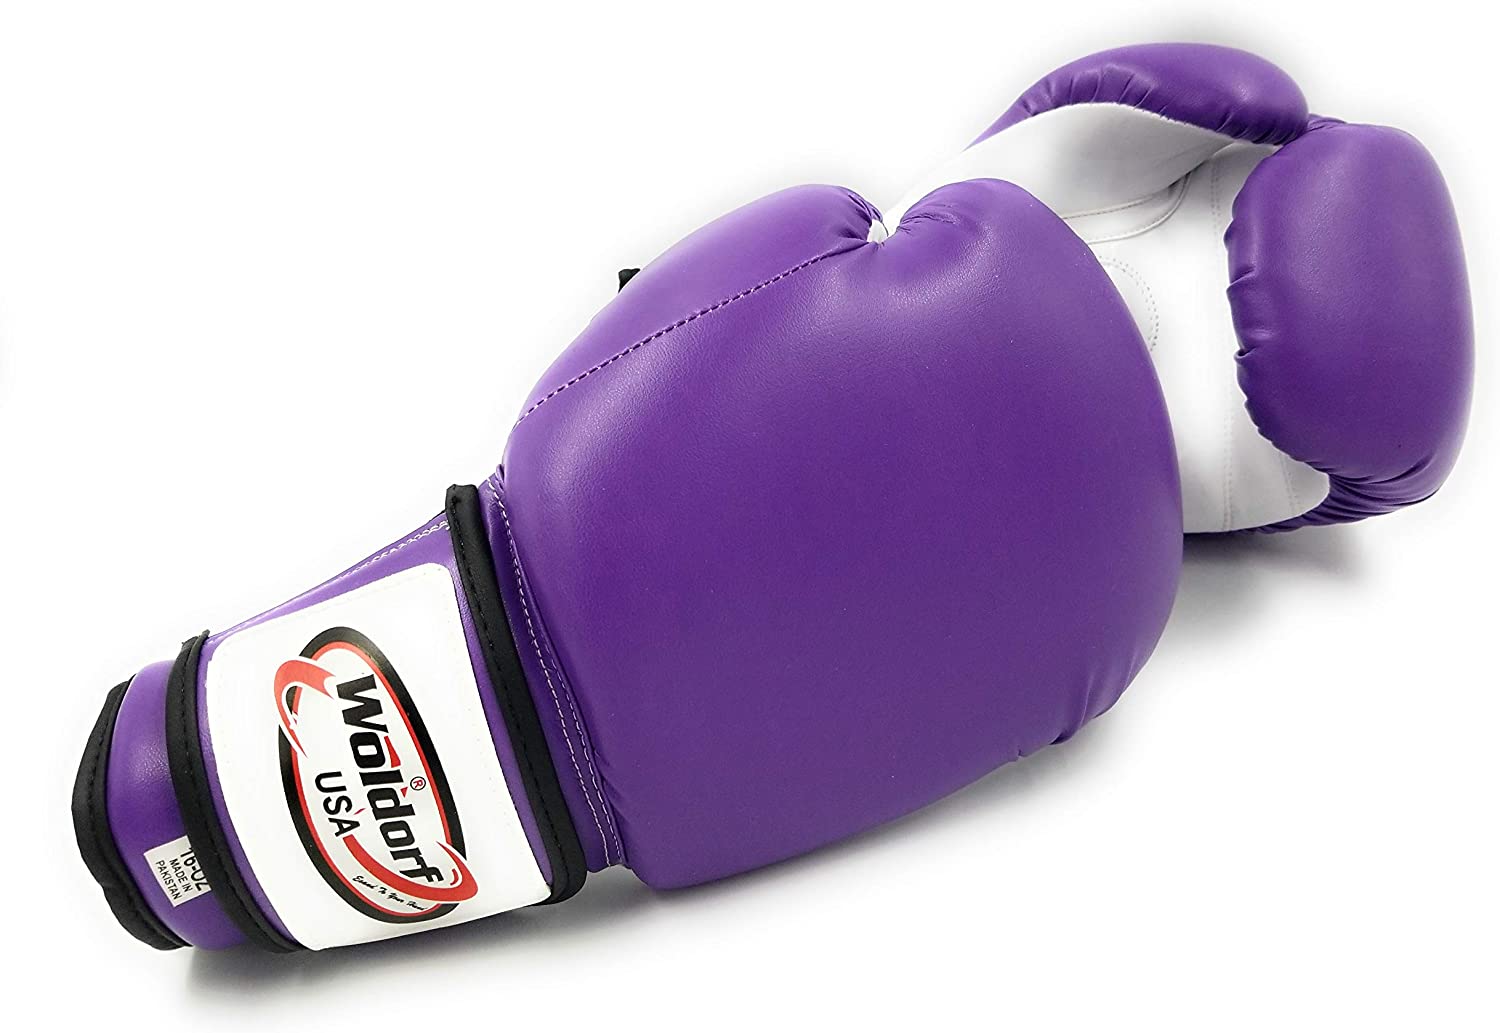 Woldorf USA Men and Women Training Fighting Sports Boxing Gloves Kickboxing Gloves Vinyl 16oz Purple Sets Muay Thai Gloves and MMA Sparring Gloves Sparring Gloves Heavy Punching Bag for Kids